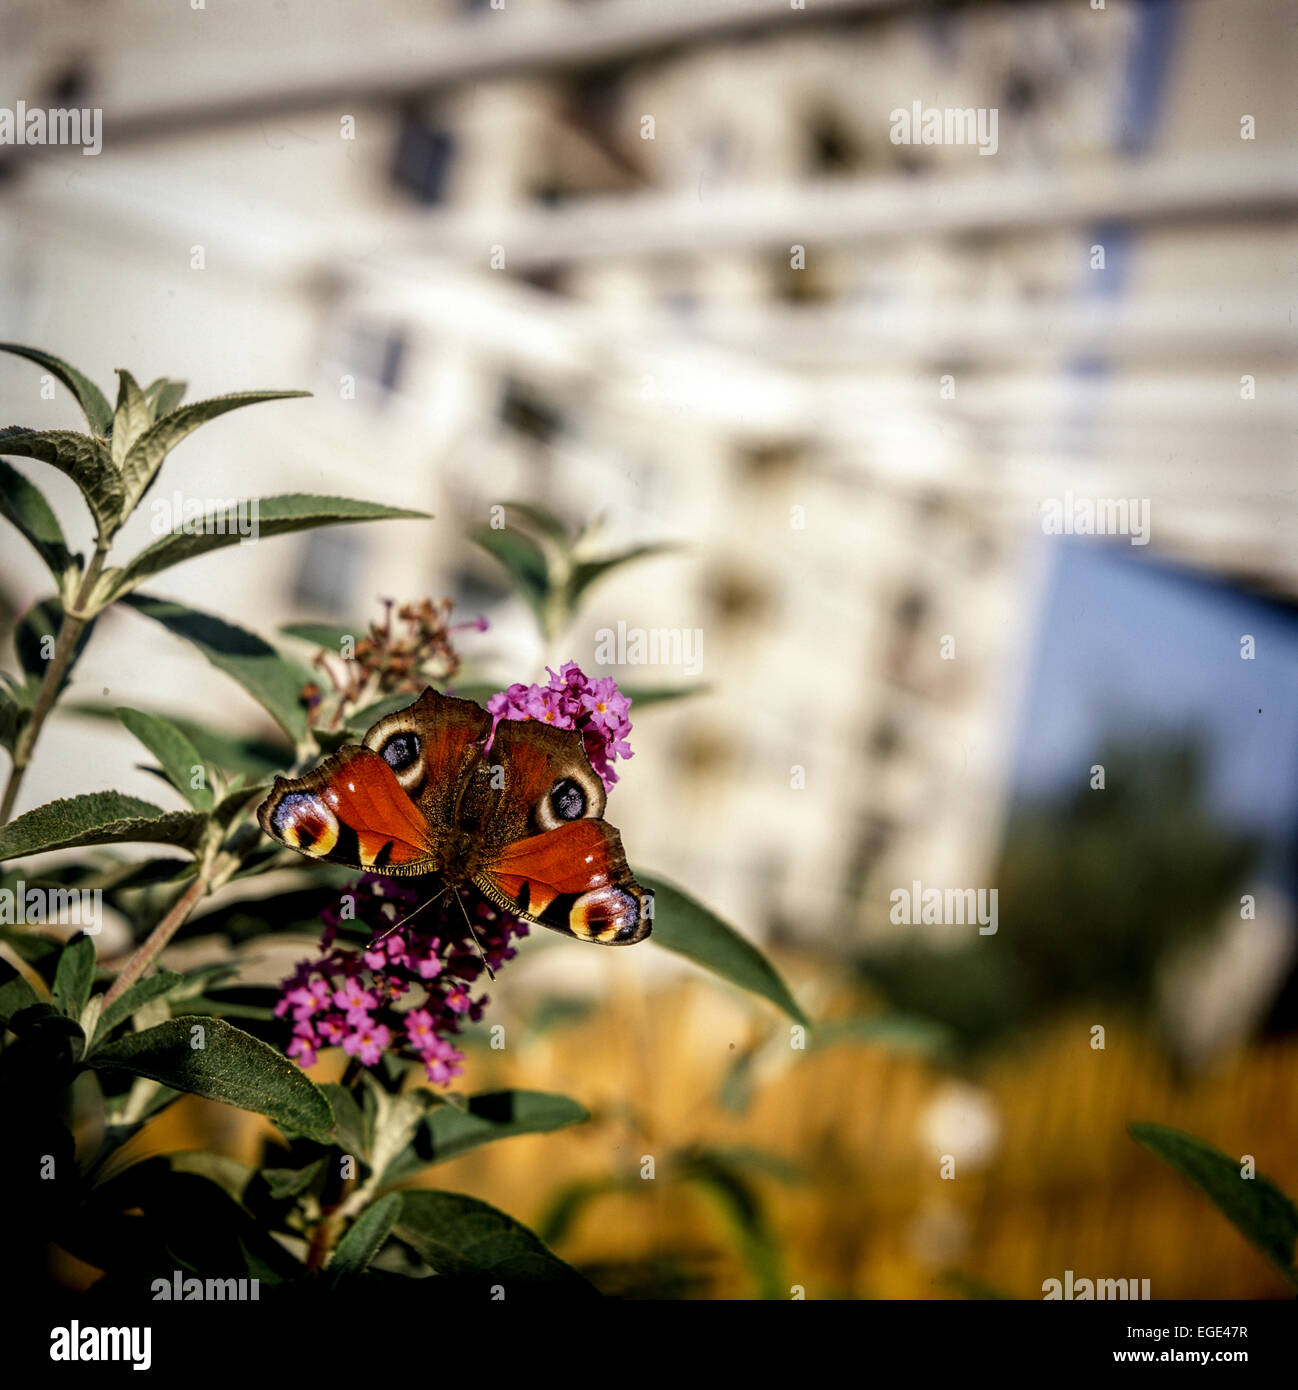 European Peacock butterfly on flower Inachis io sitting on a flower, building background, Urban butterfly, Stock Photo